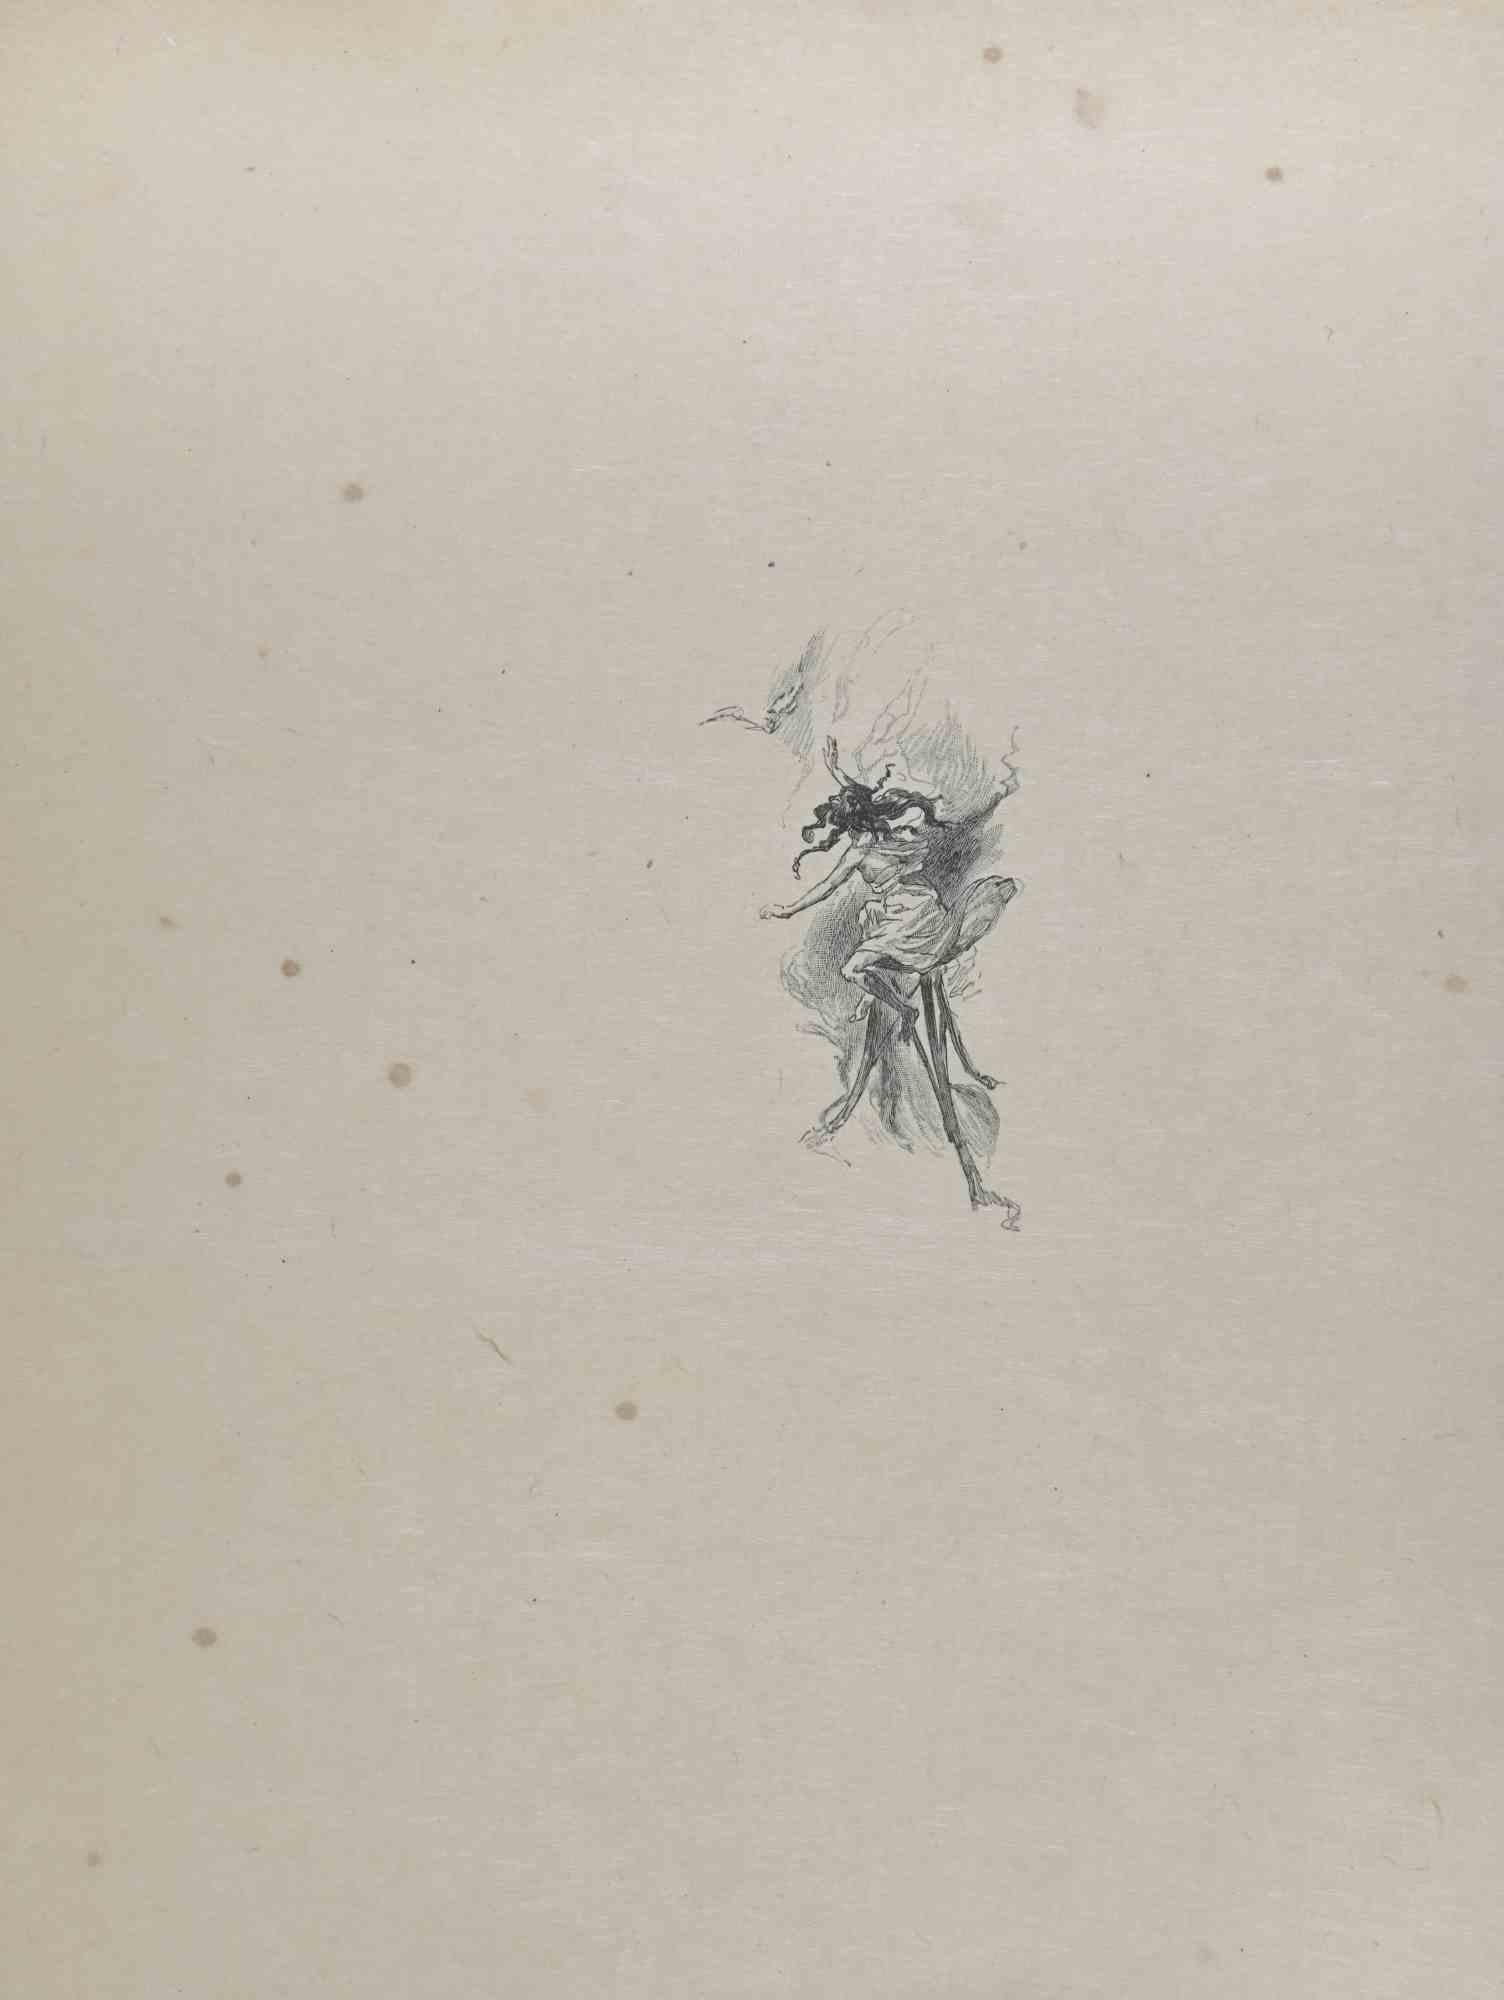 Fairy is a lithograph on paper realized by Hégésippe Moreau in 1838.

The artwork is in good conditions.

Hégésippe Moreau (1810-1838) was a French lyric poet. The romantic myth was solidified by the publication of his complete works;Moreau's work